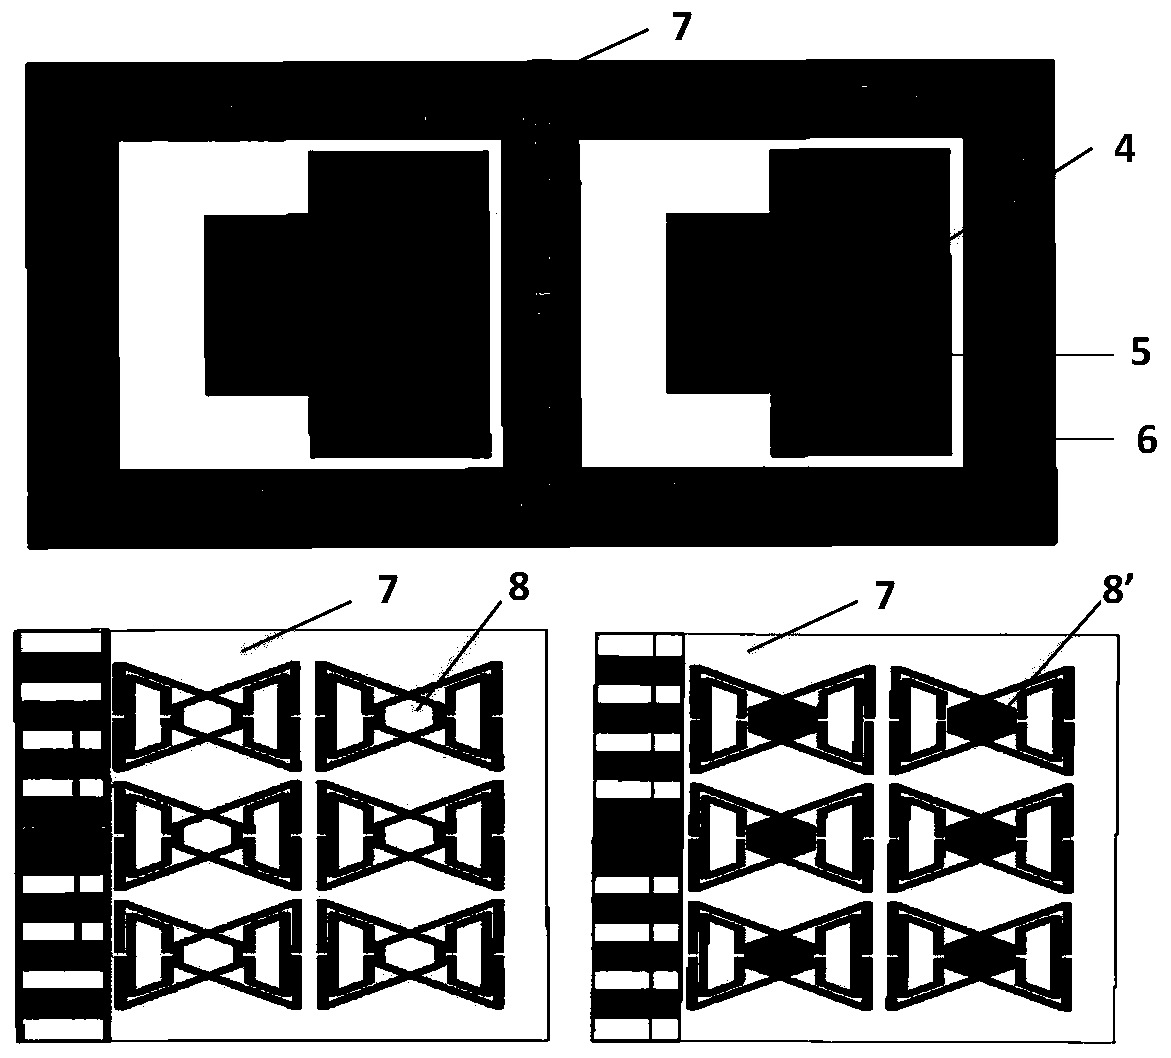 SIW antenna array for loading butterfly-shaped left-handed material unit